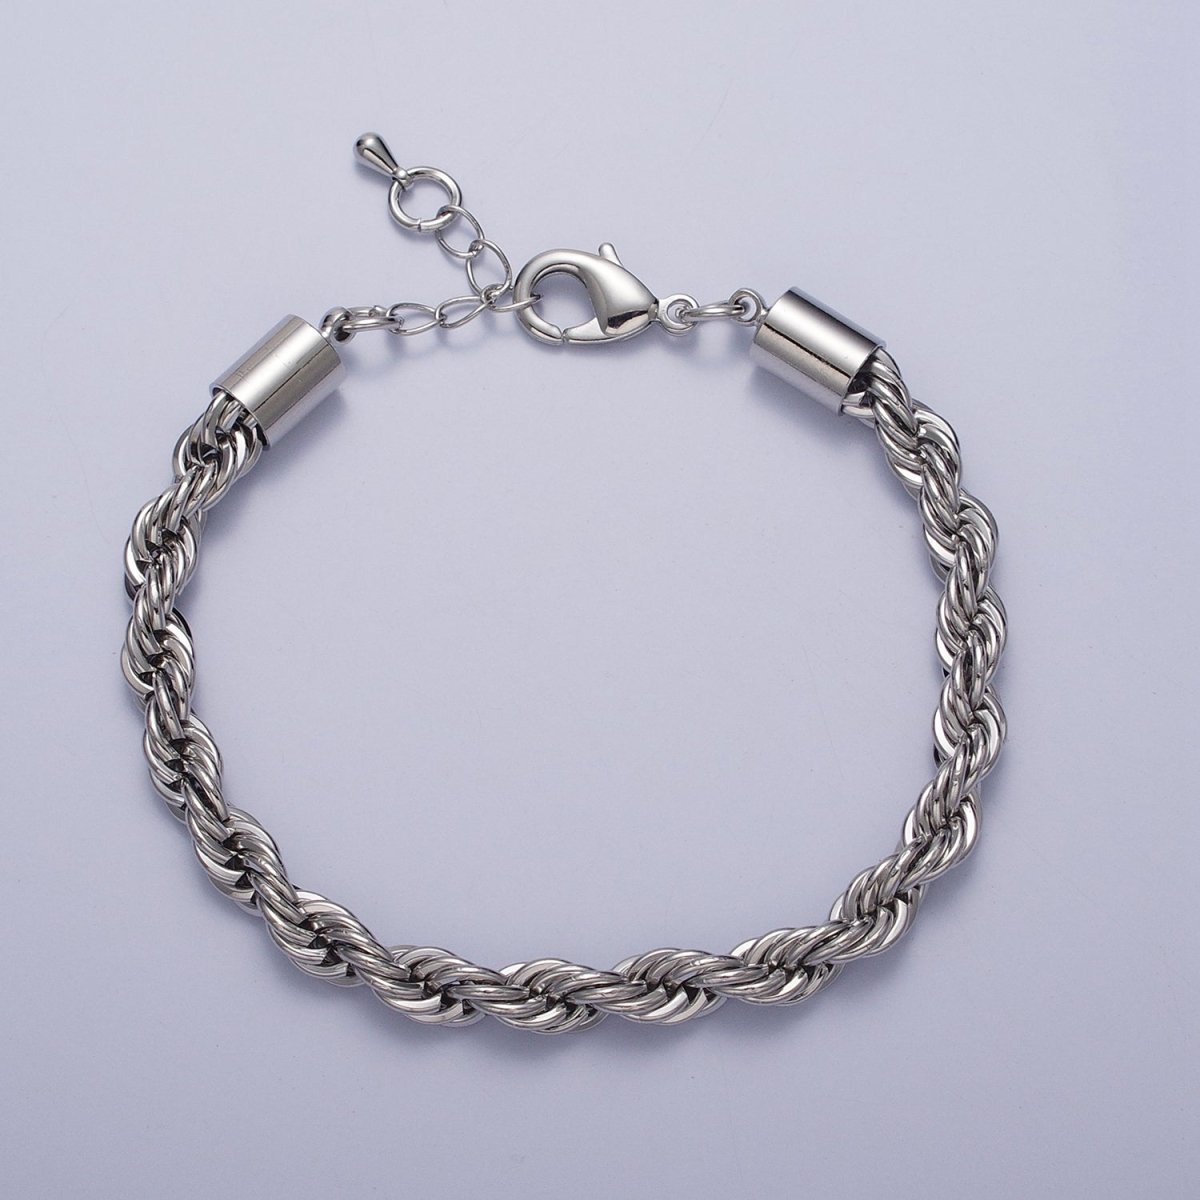 Bold Gold Twisted Rope Chain Bracelet Silver Chunky Rope Chain bracelet 6mm thickness | WA-1542 WA-1543 Clearance Pricing - DLUXCA